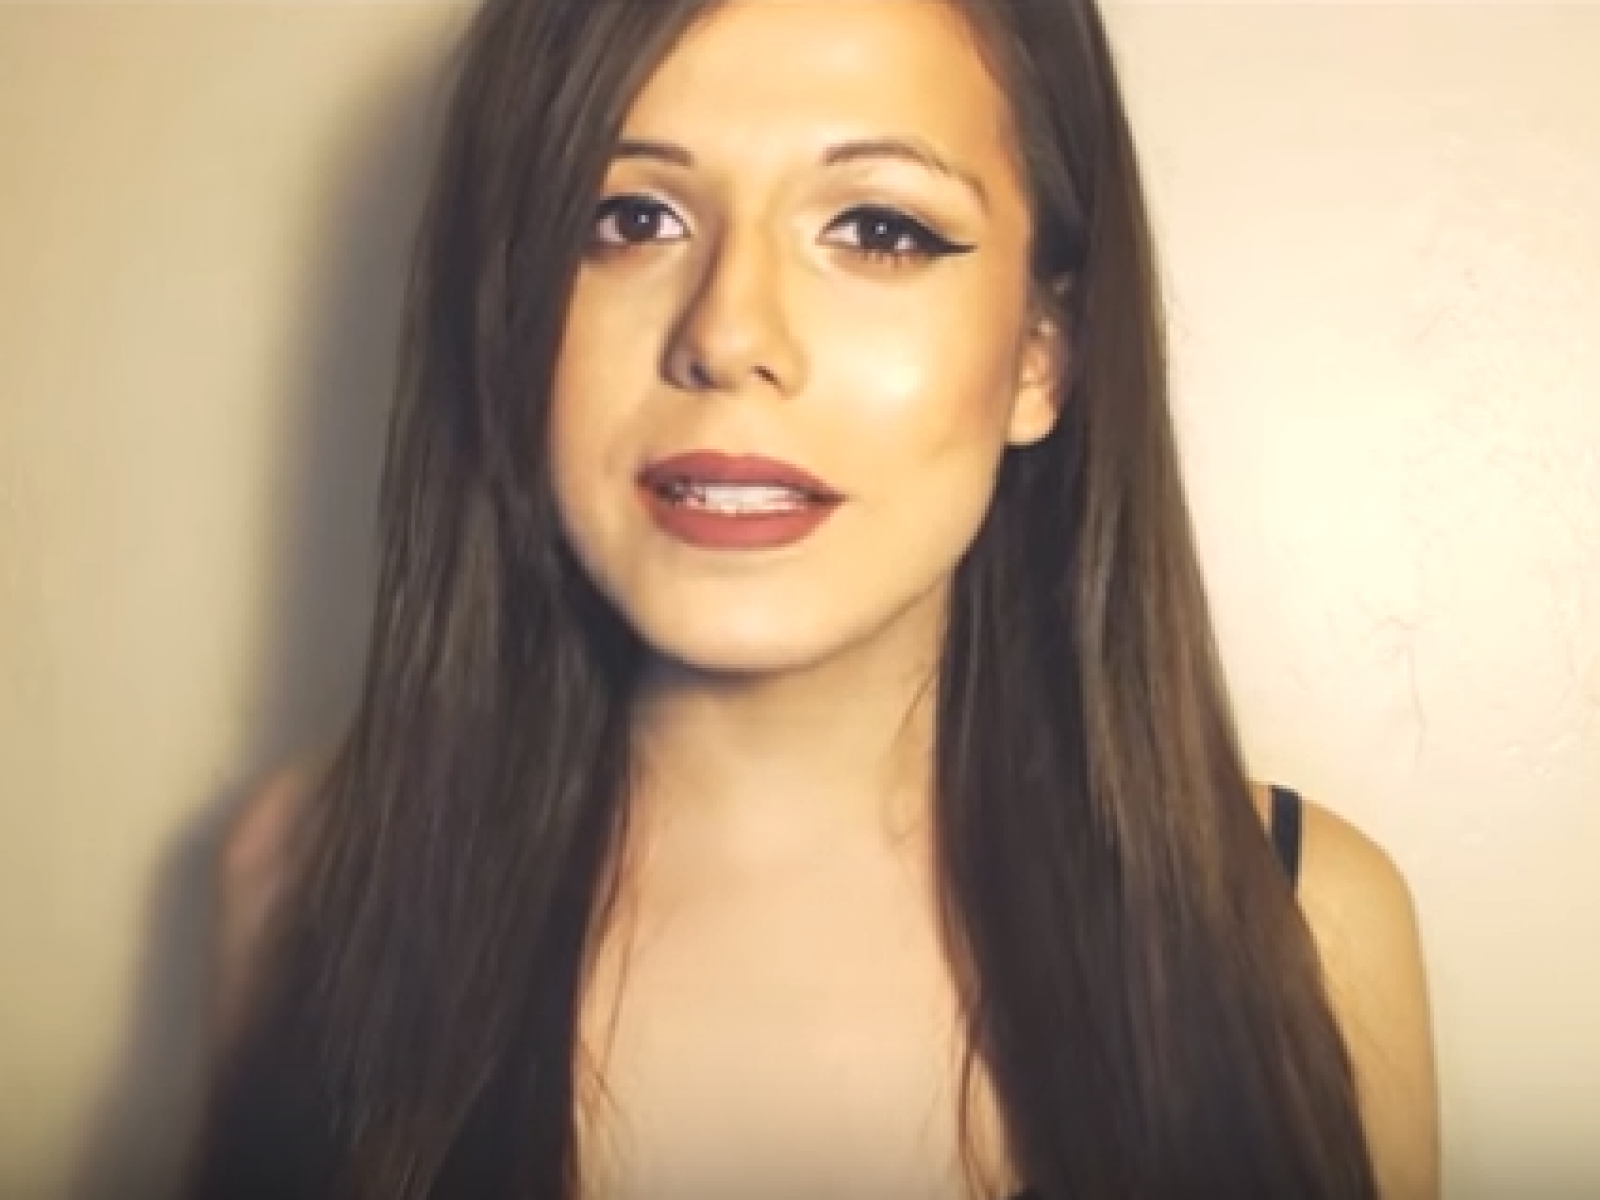 1600px x 1200px - Meet Blaire White, the Transgender Trump Supporter Winning Over  Conservatives on YouTube